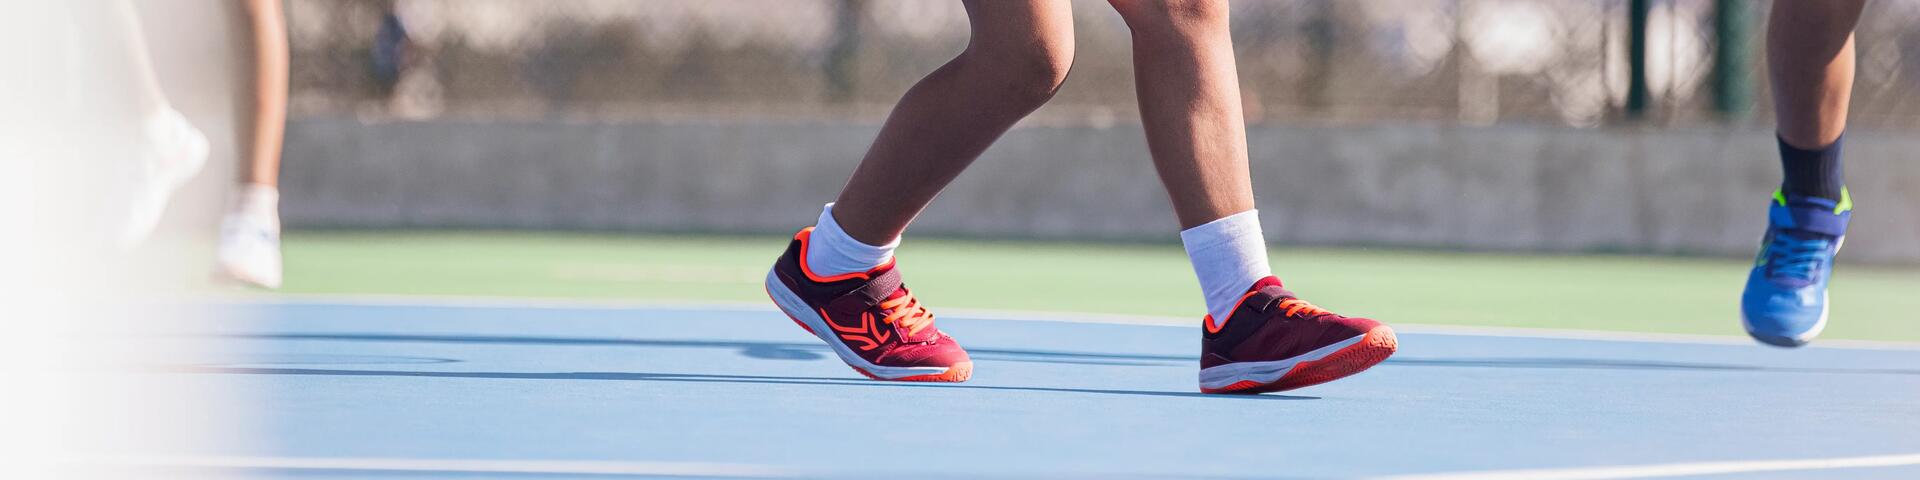 Close-up of tennis shoes